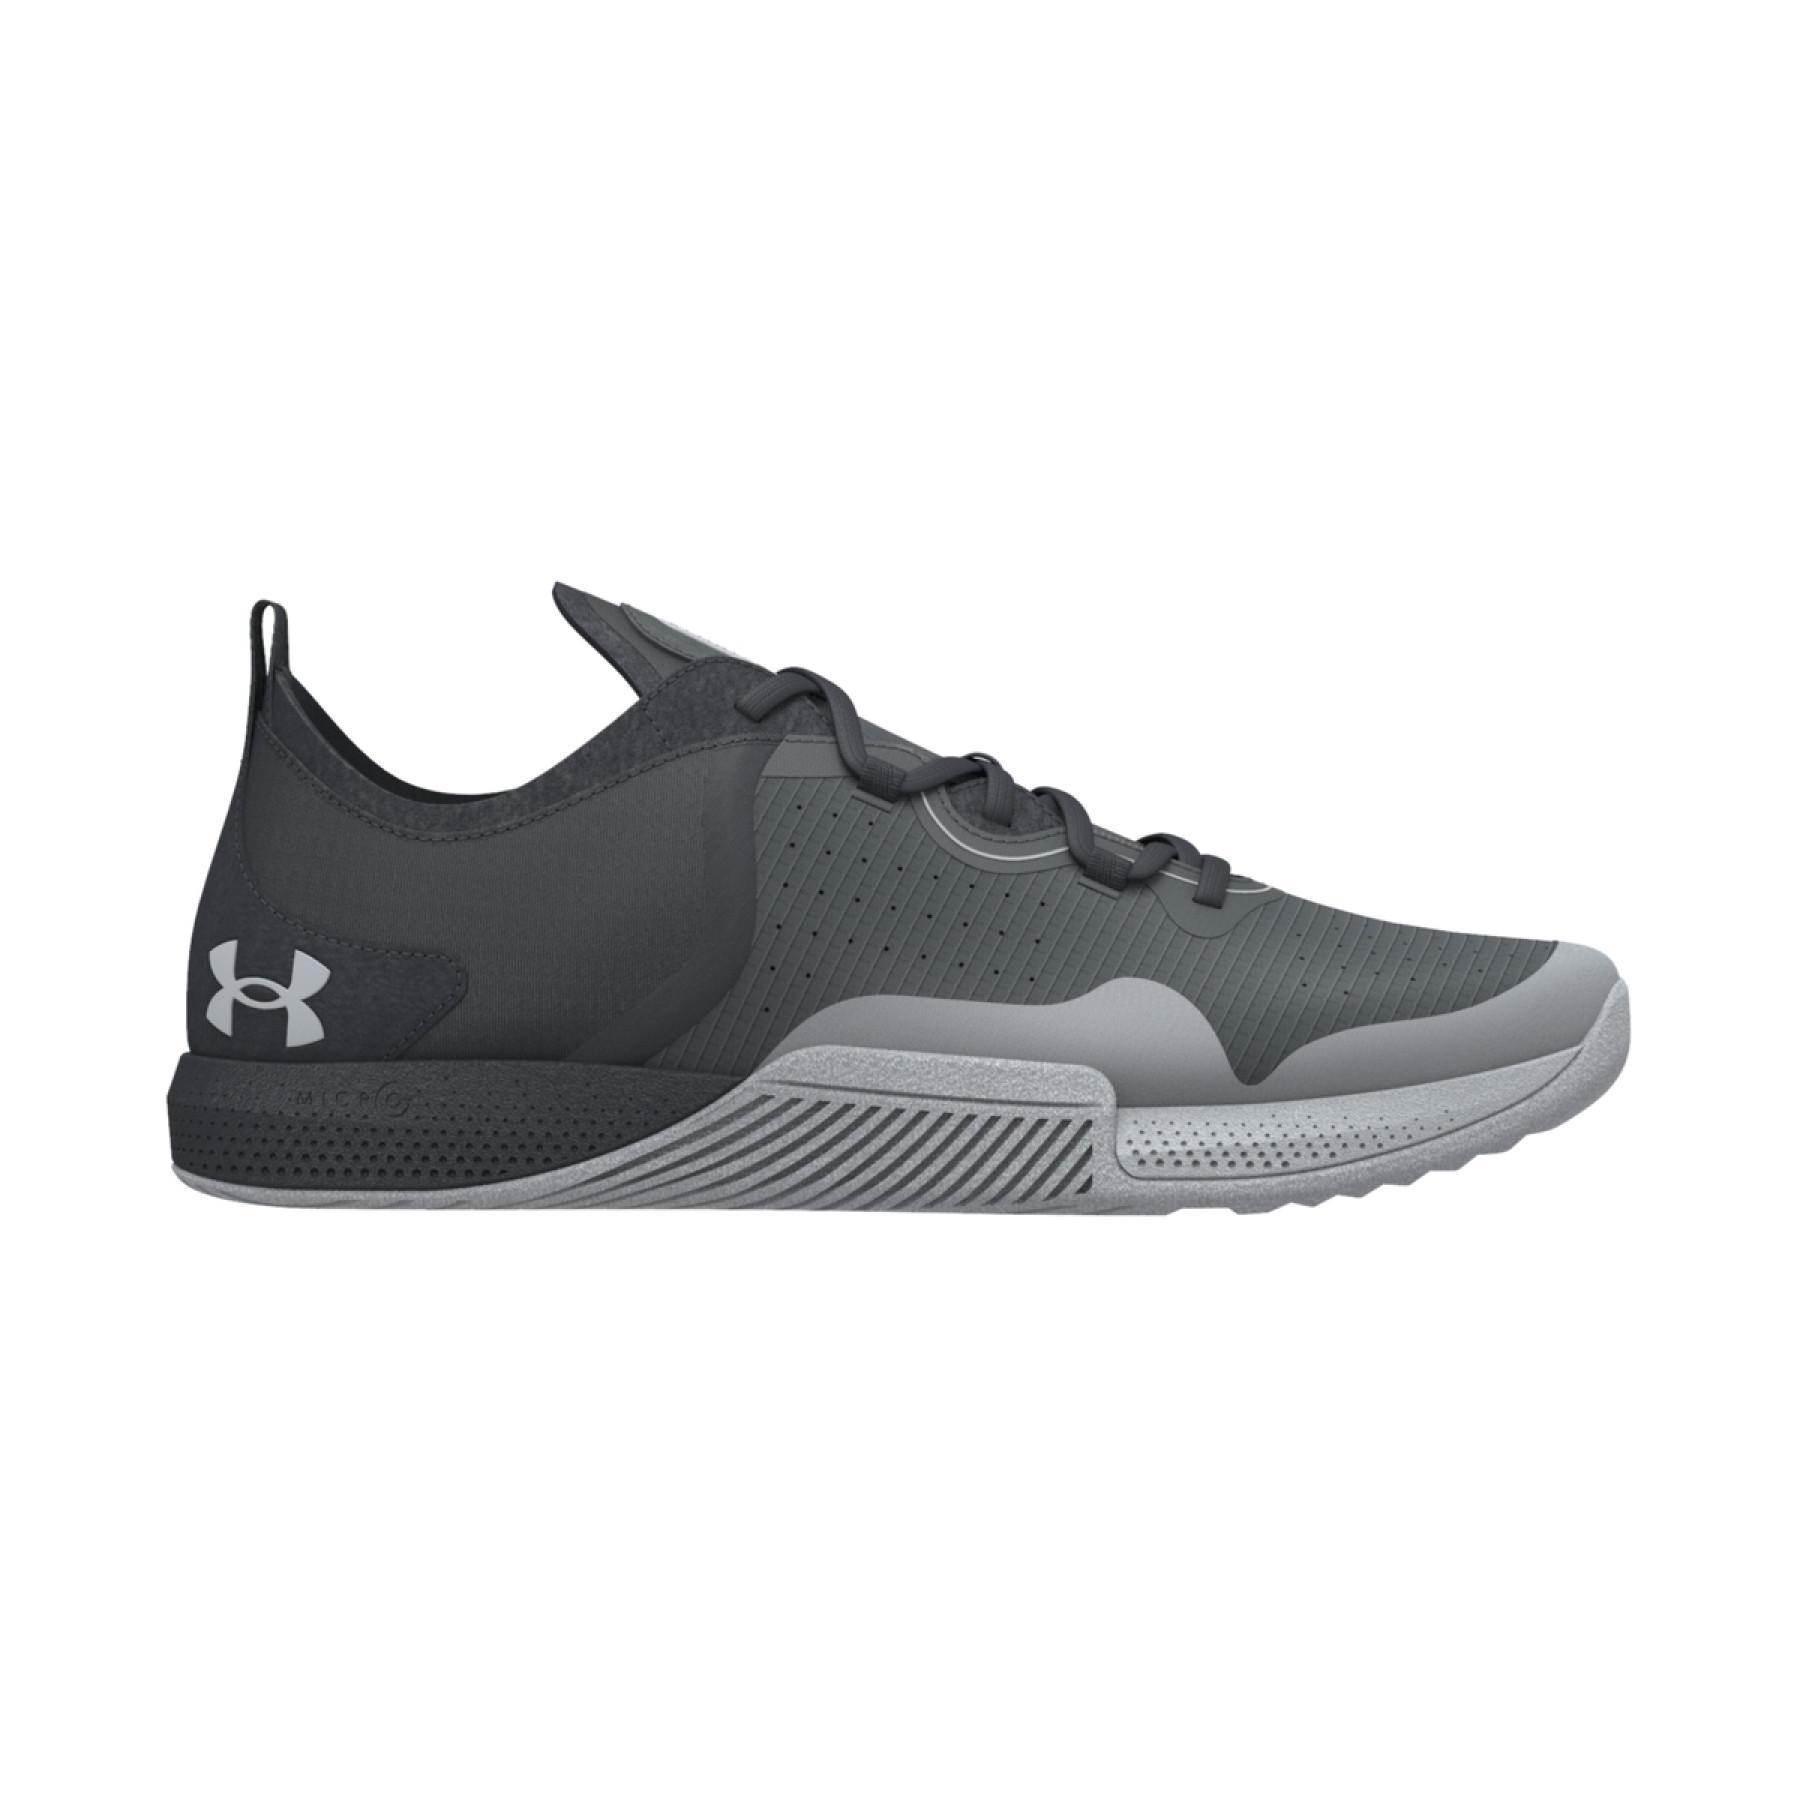 Under Armour Men's Tribase Thrive 2 Cross Trainer 